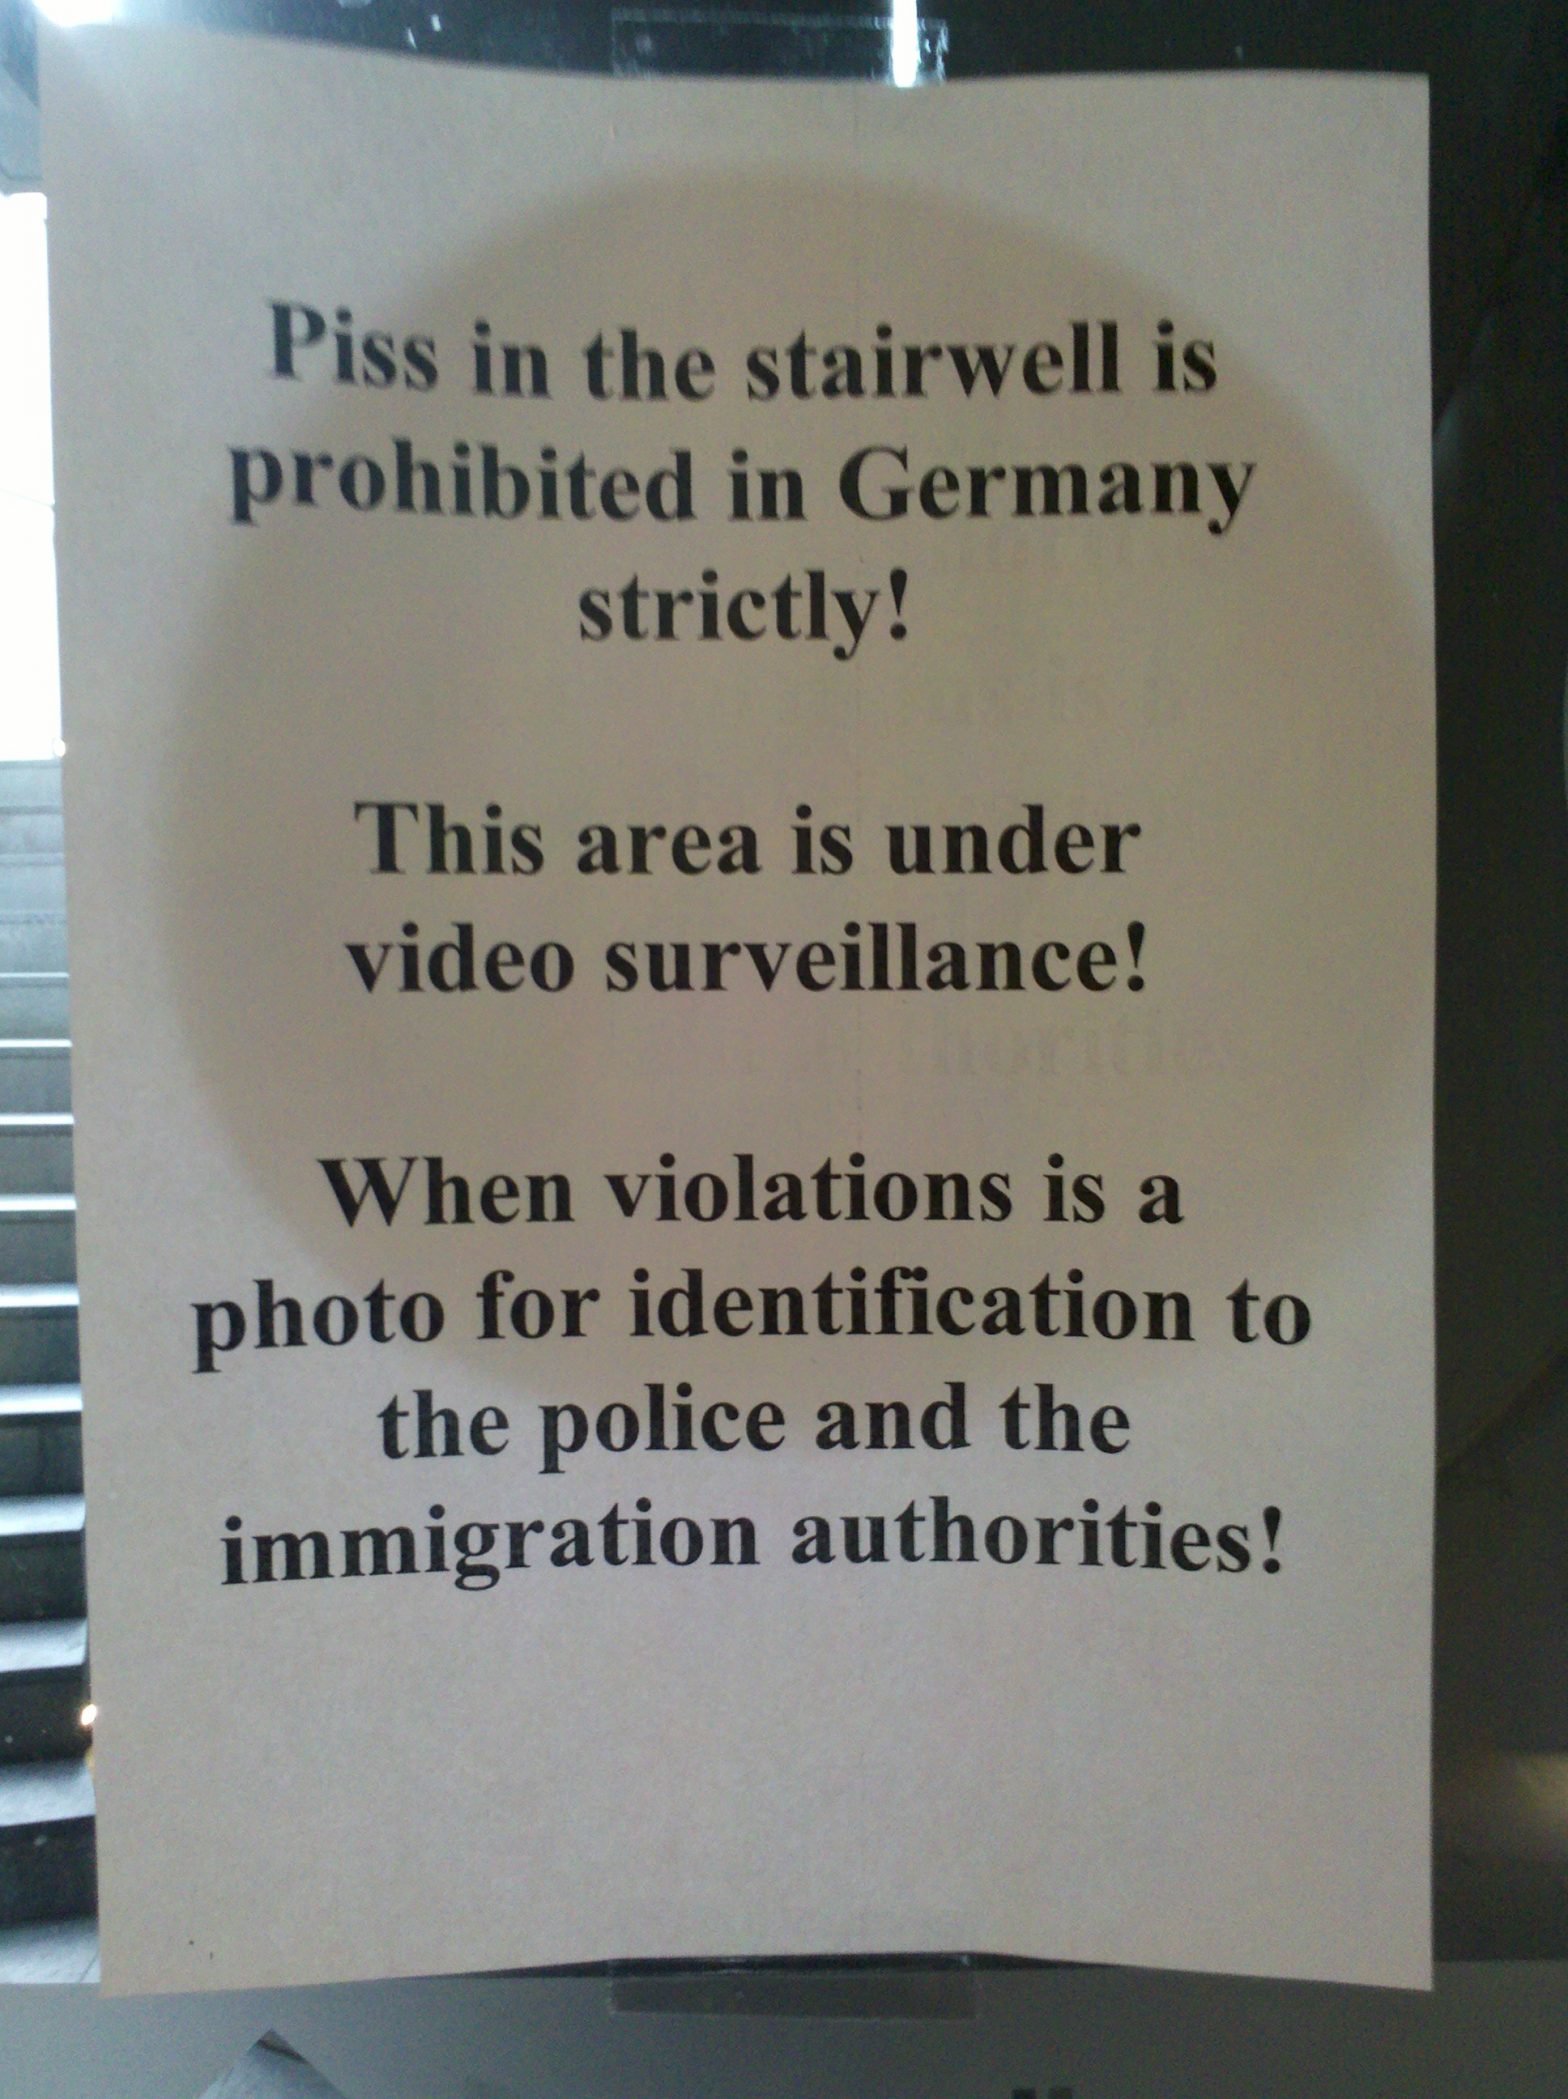 Piss in the stairwell is prohibited in Germany strictly!